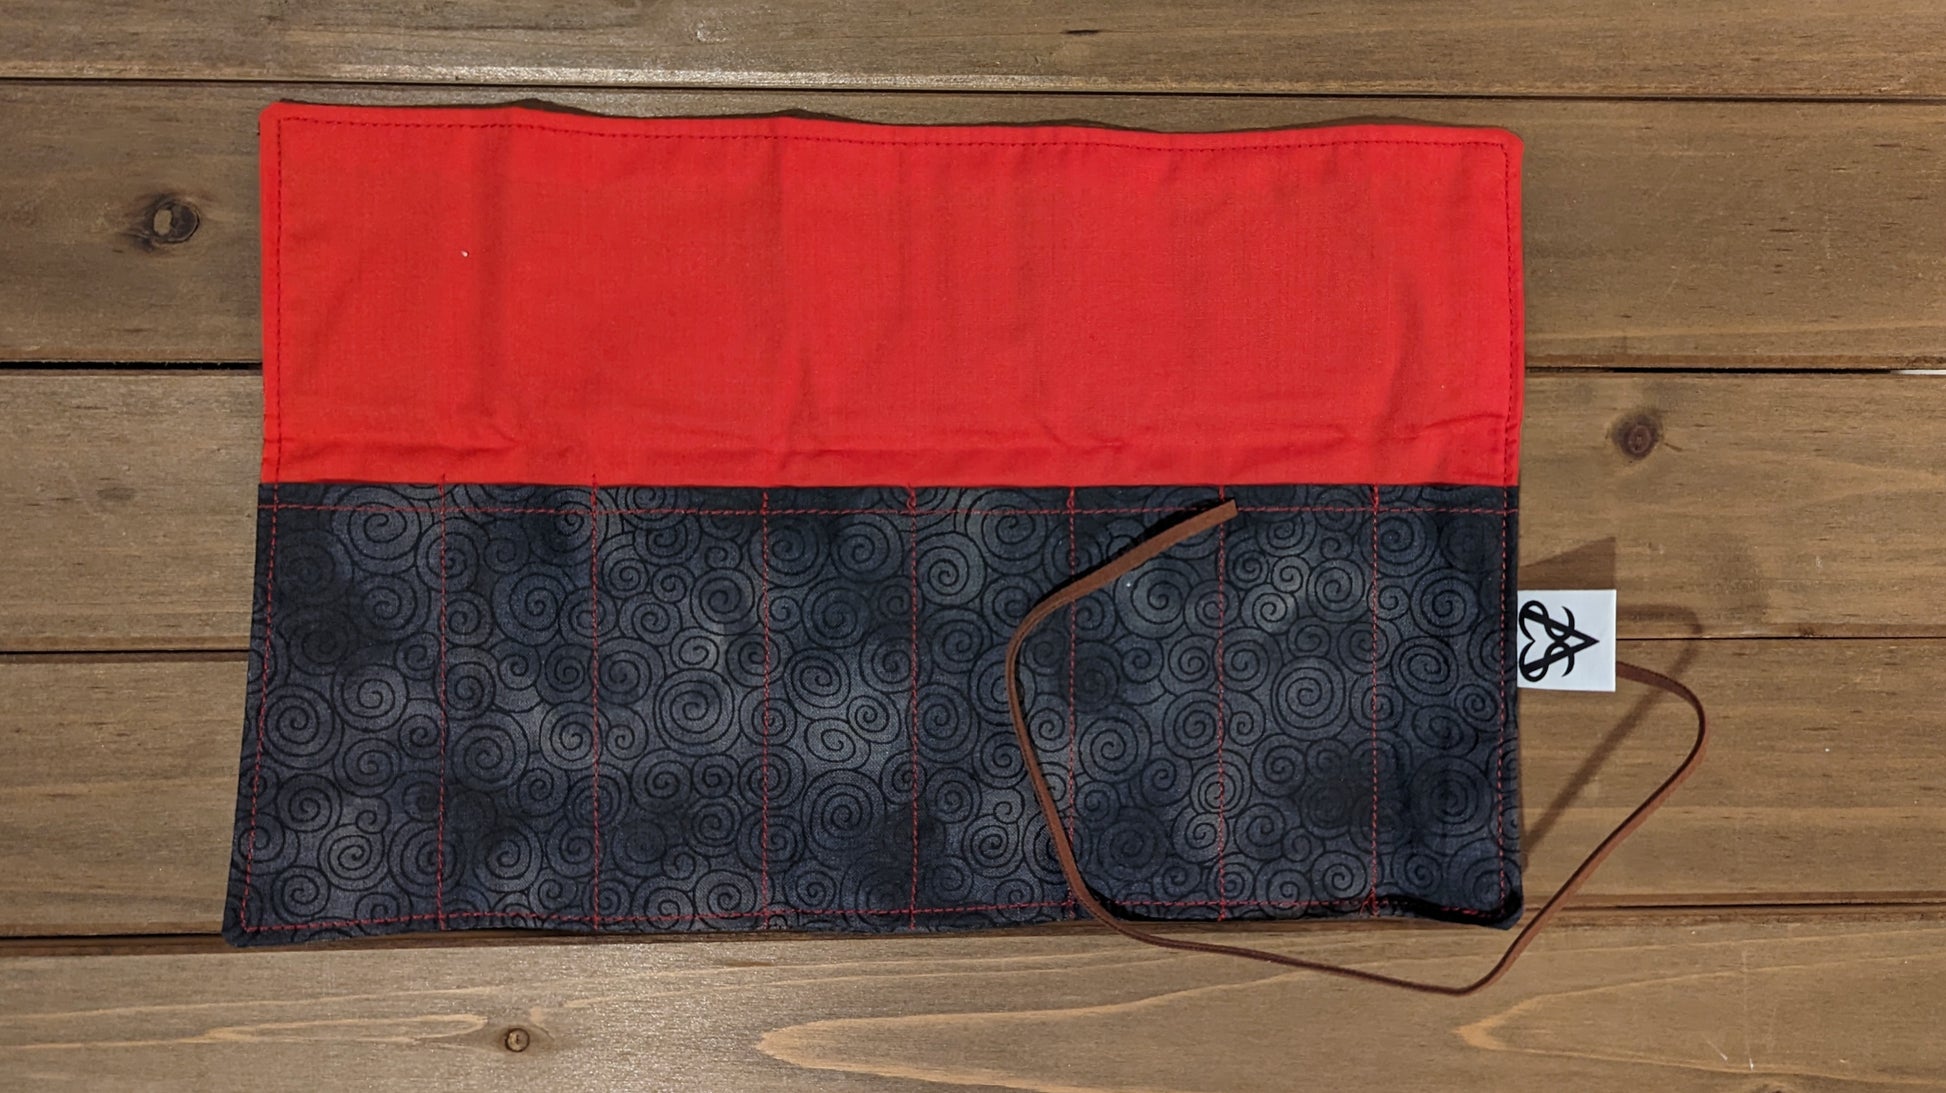 A short pen roll is open to show the bright red liner in the protective flap and 8 pocket channels with the same swirling fabric as outside.